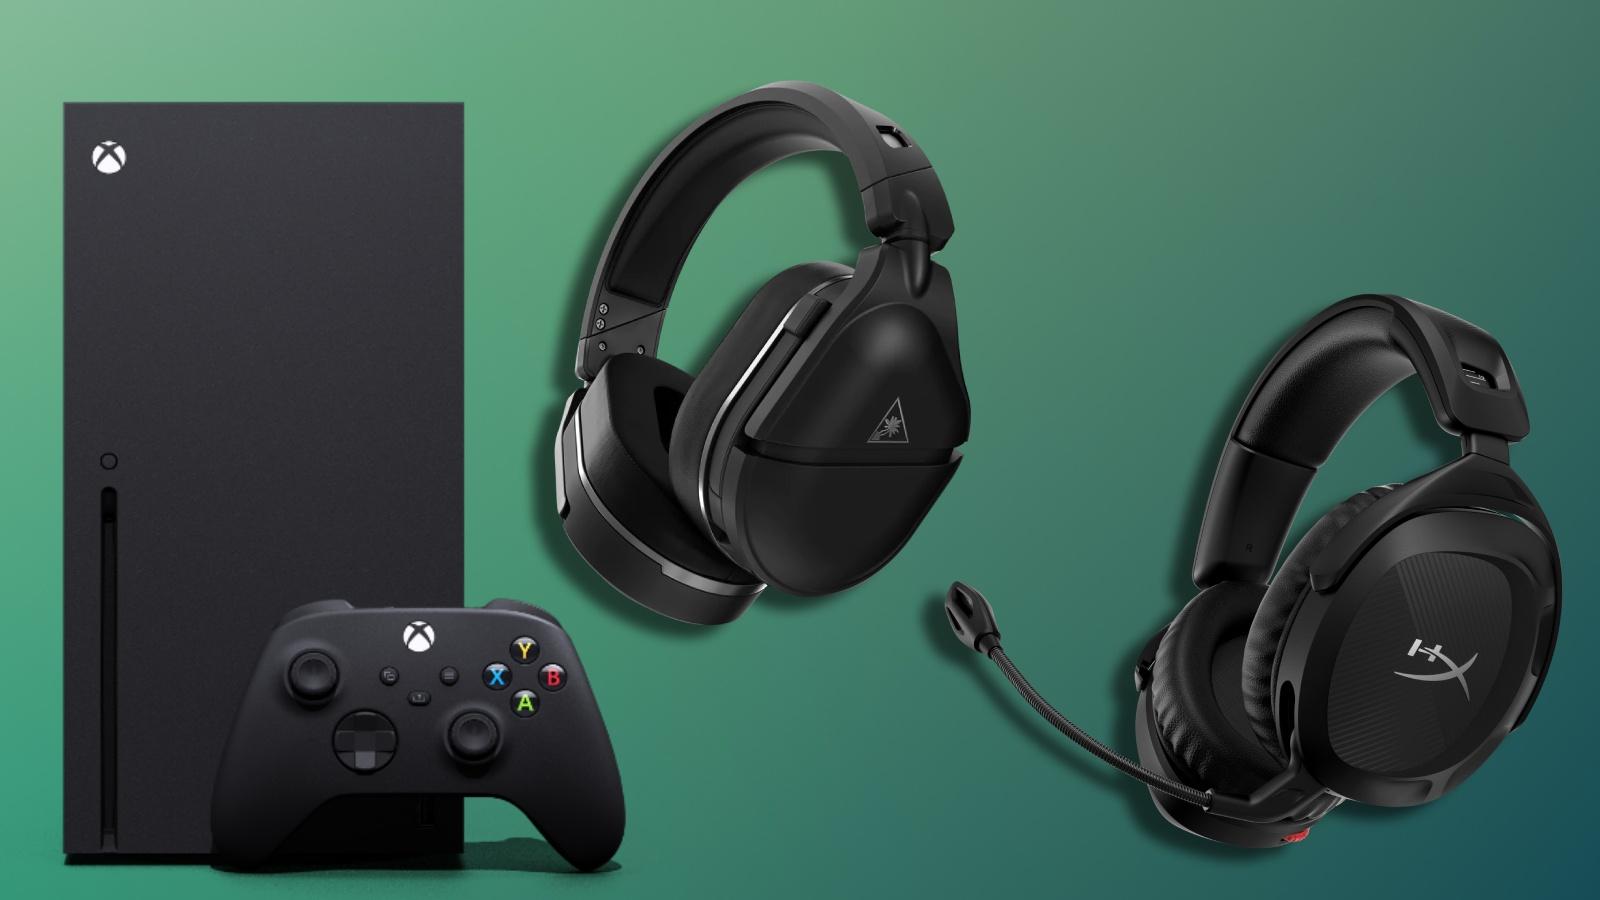 Xbox series X on green background with two headsets